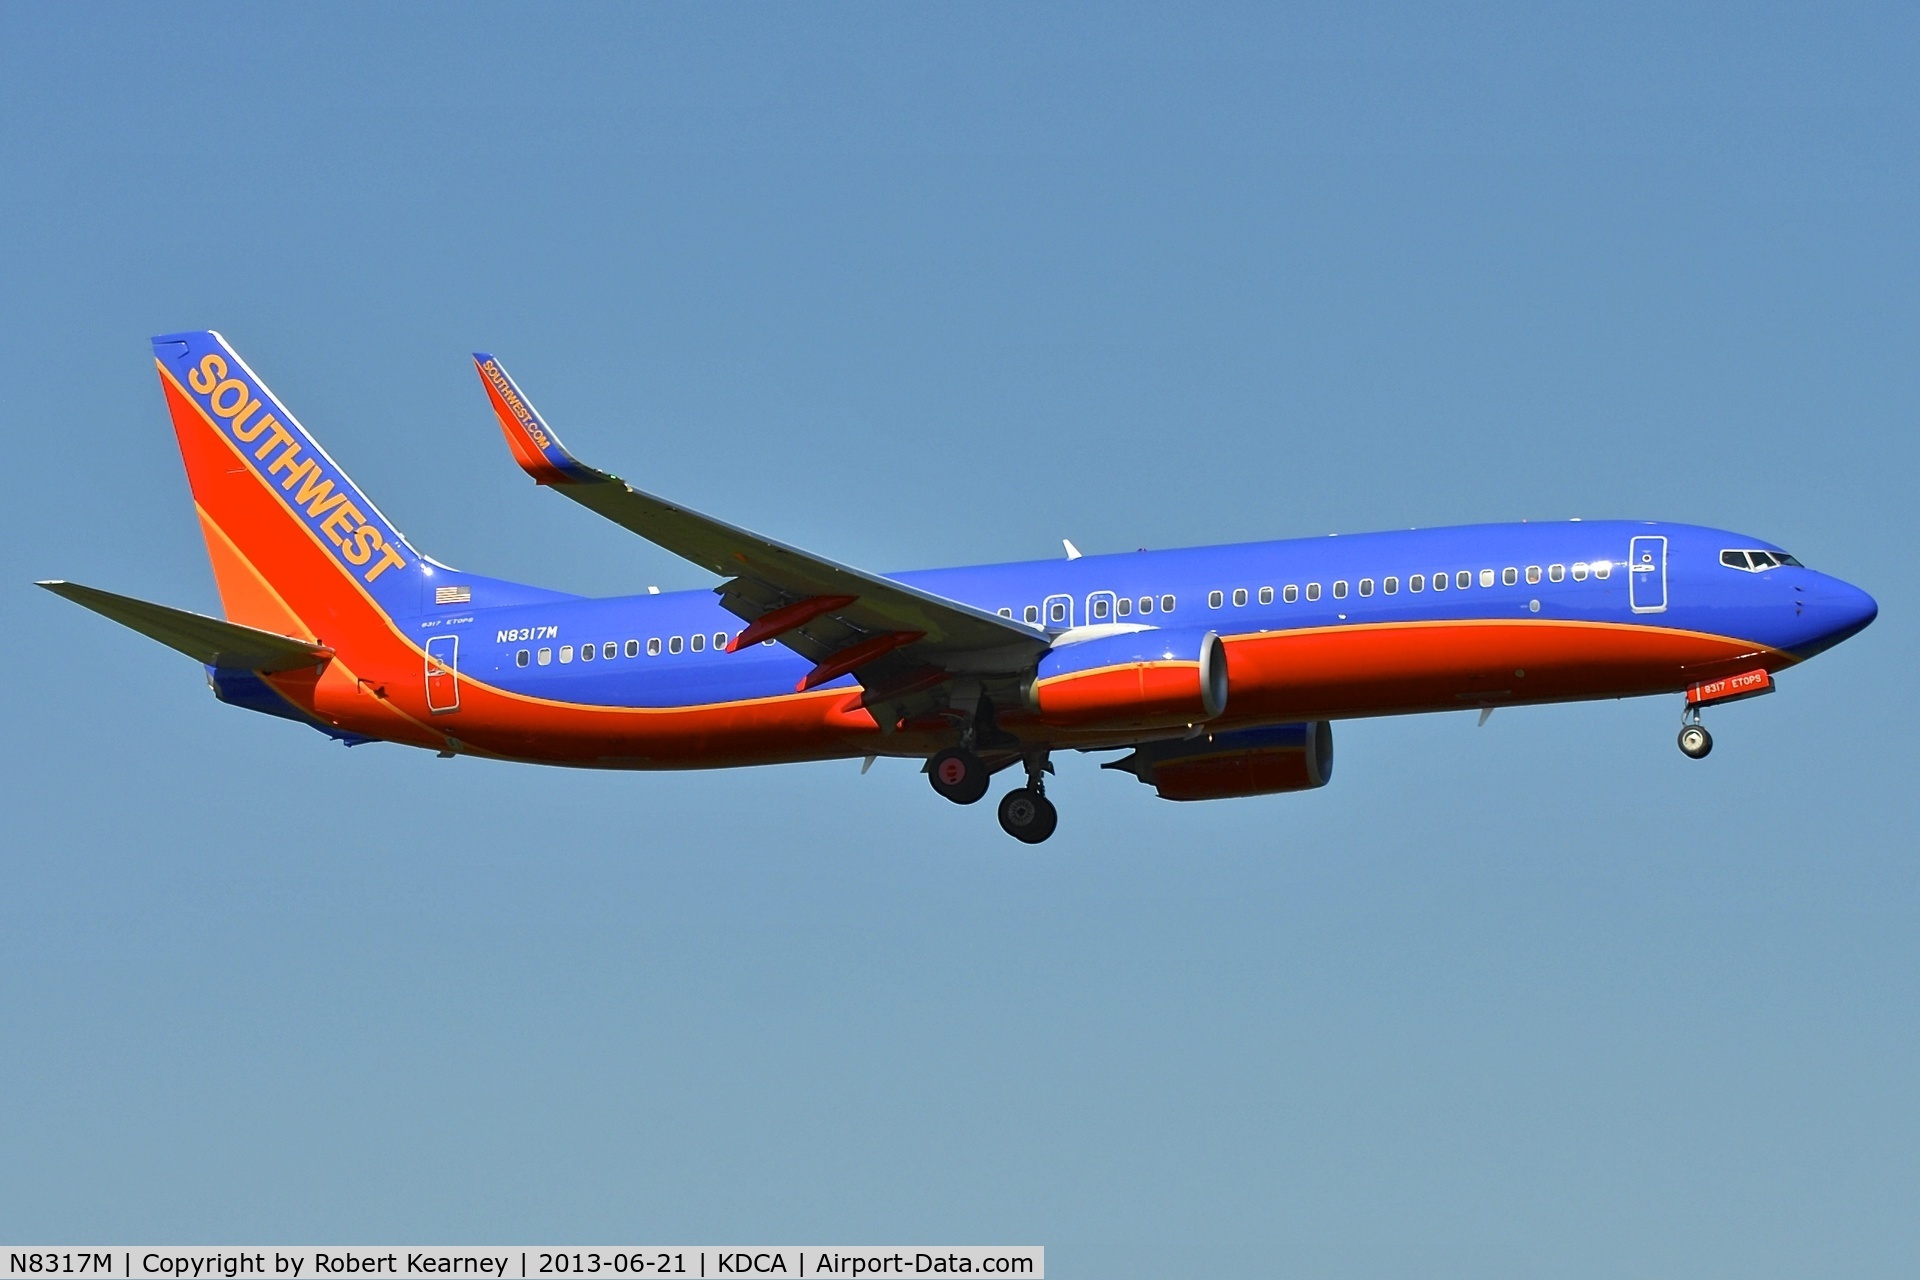 N8317M, 2012 Boeing 737-8H4 C/N 36992, On short finals for r/w 19